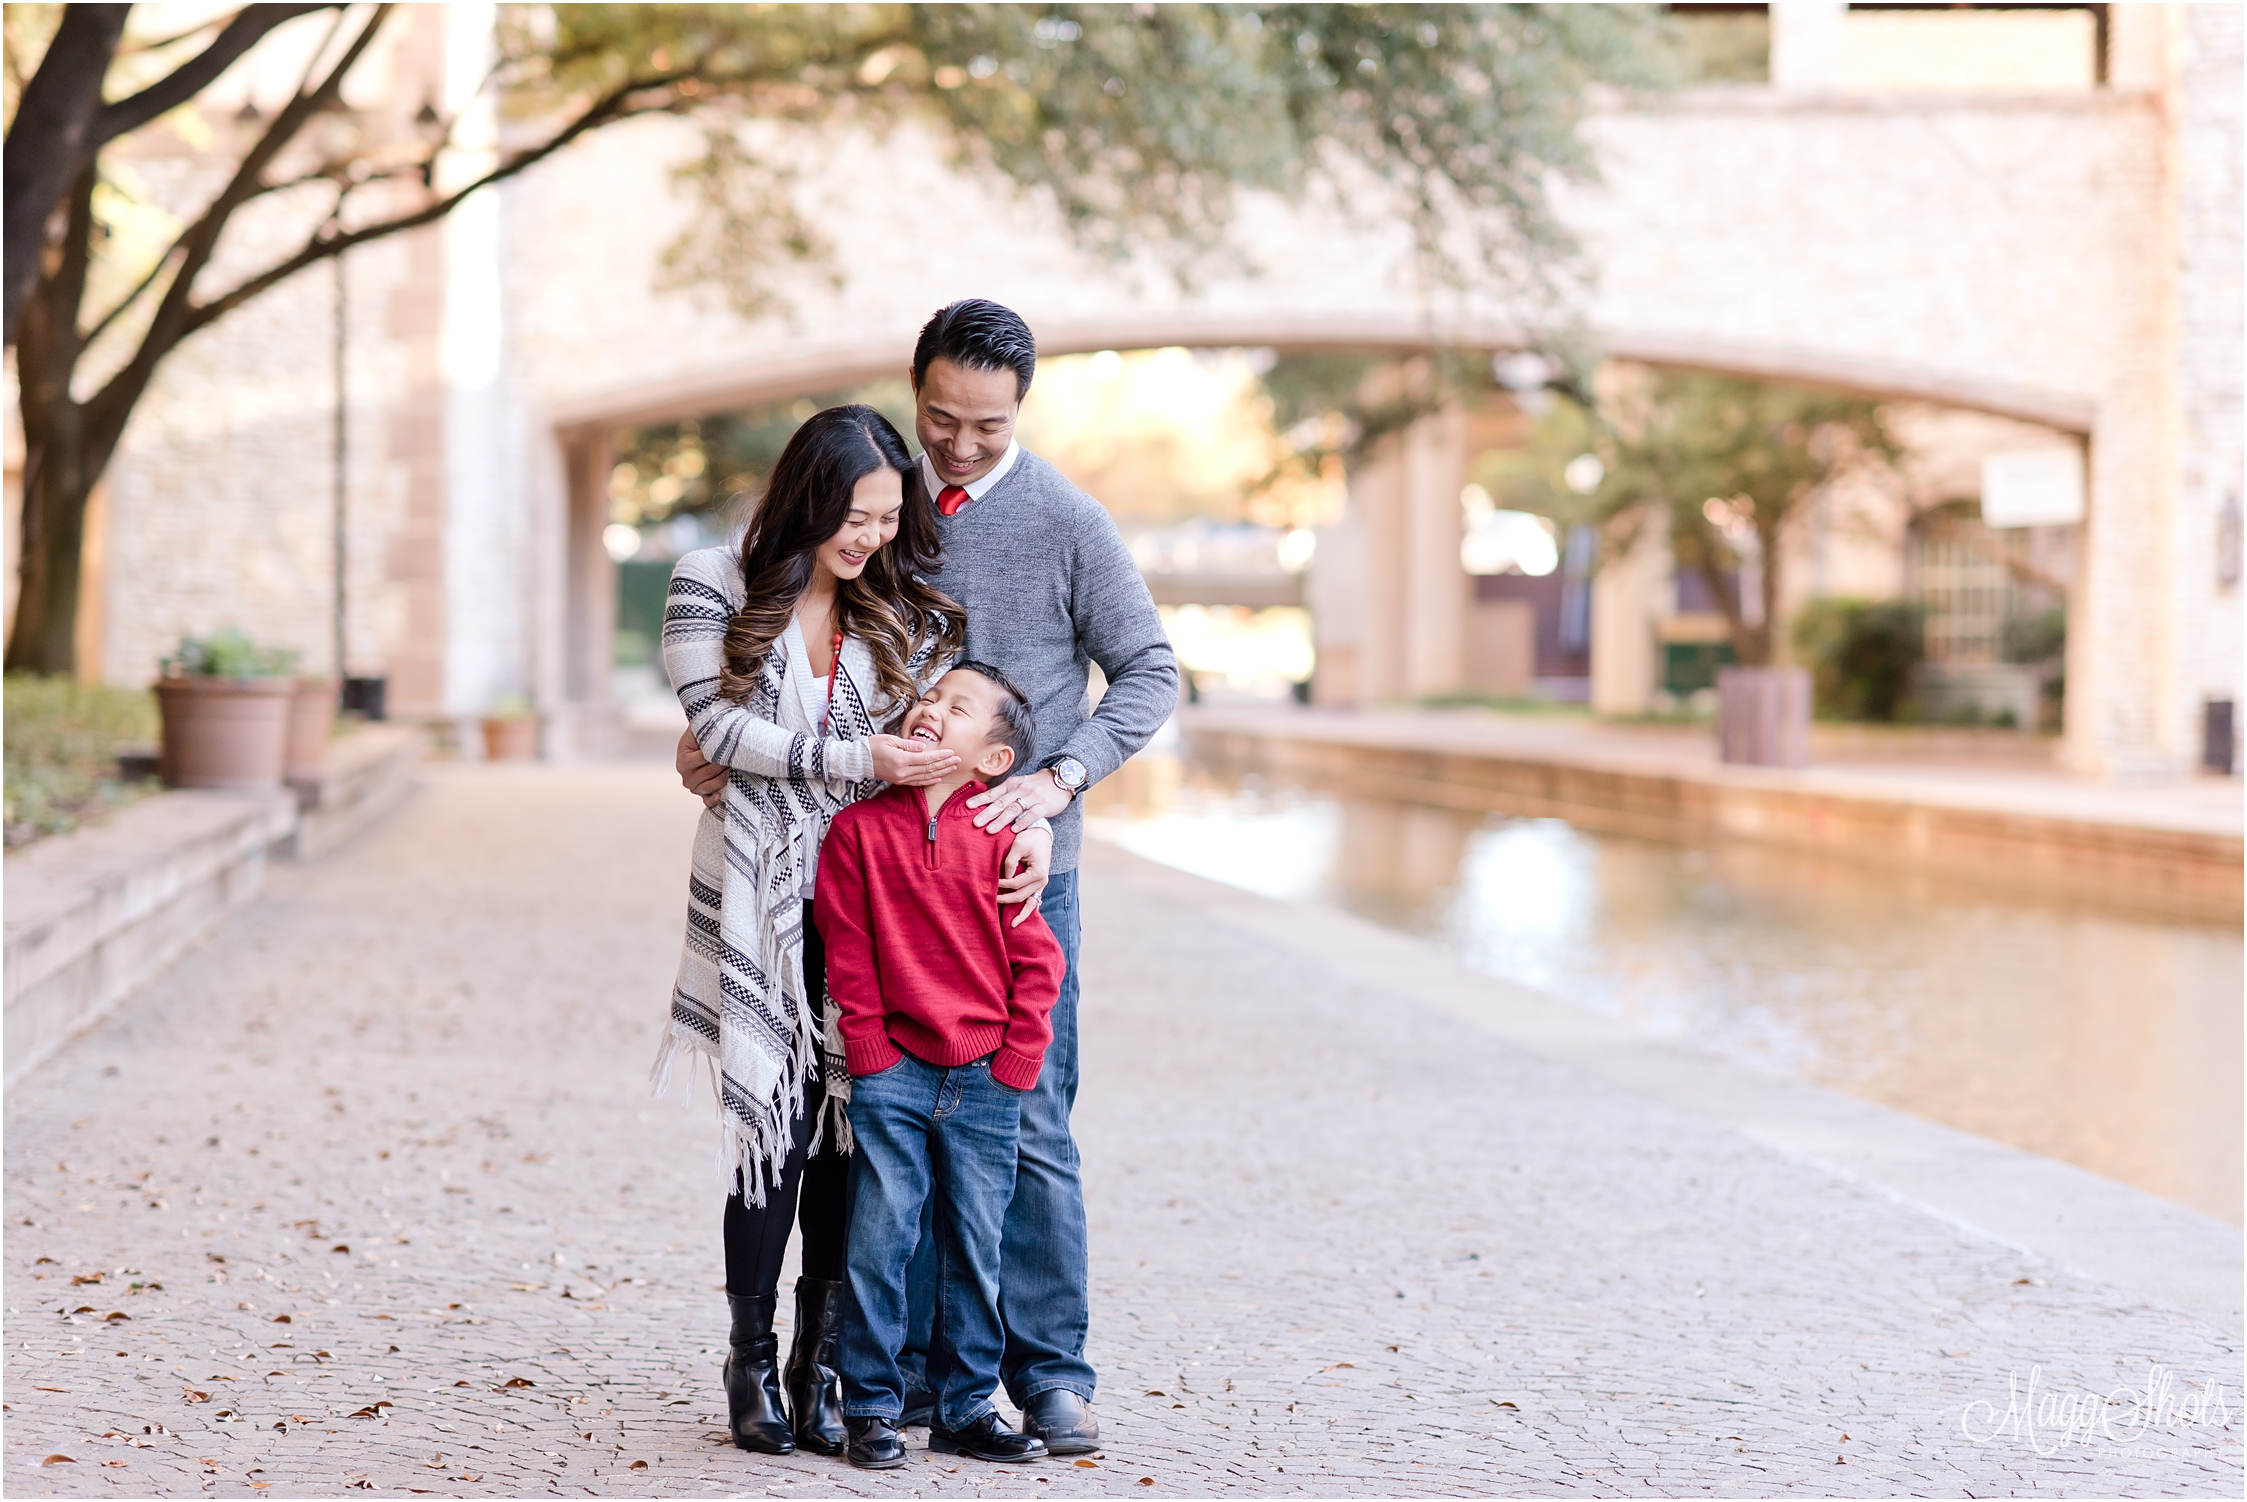 MaggShots Photography, MaggShots, Professional Photography, Professional Photographer, Destination Photography, Family Portraits, Family Session, Love, Las Colinas Canals, Family